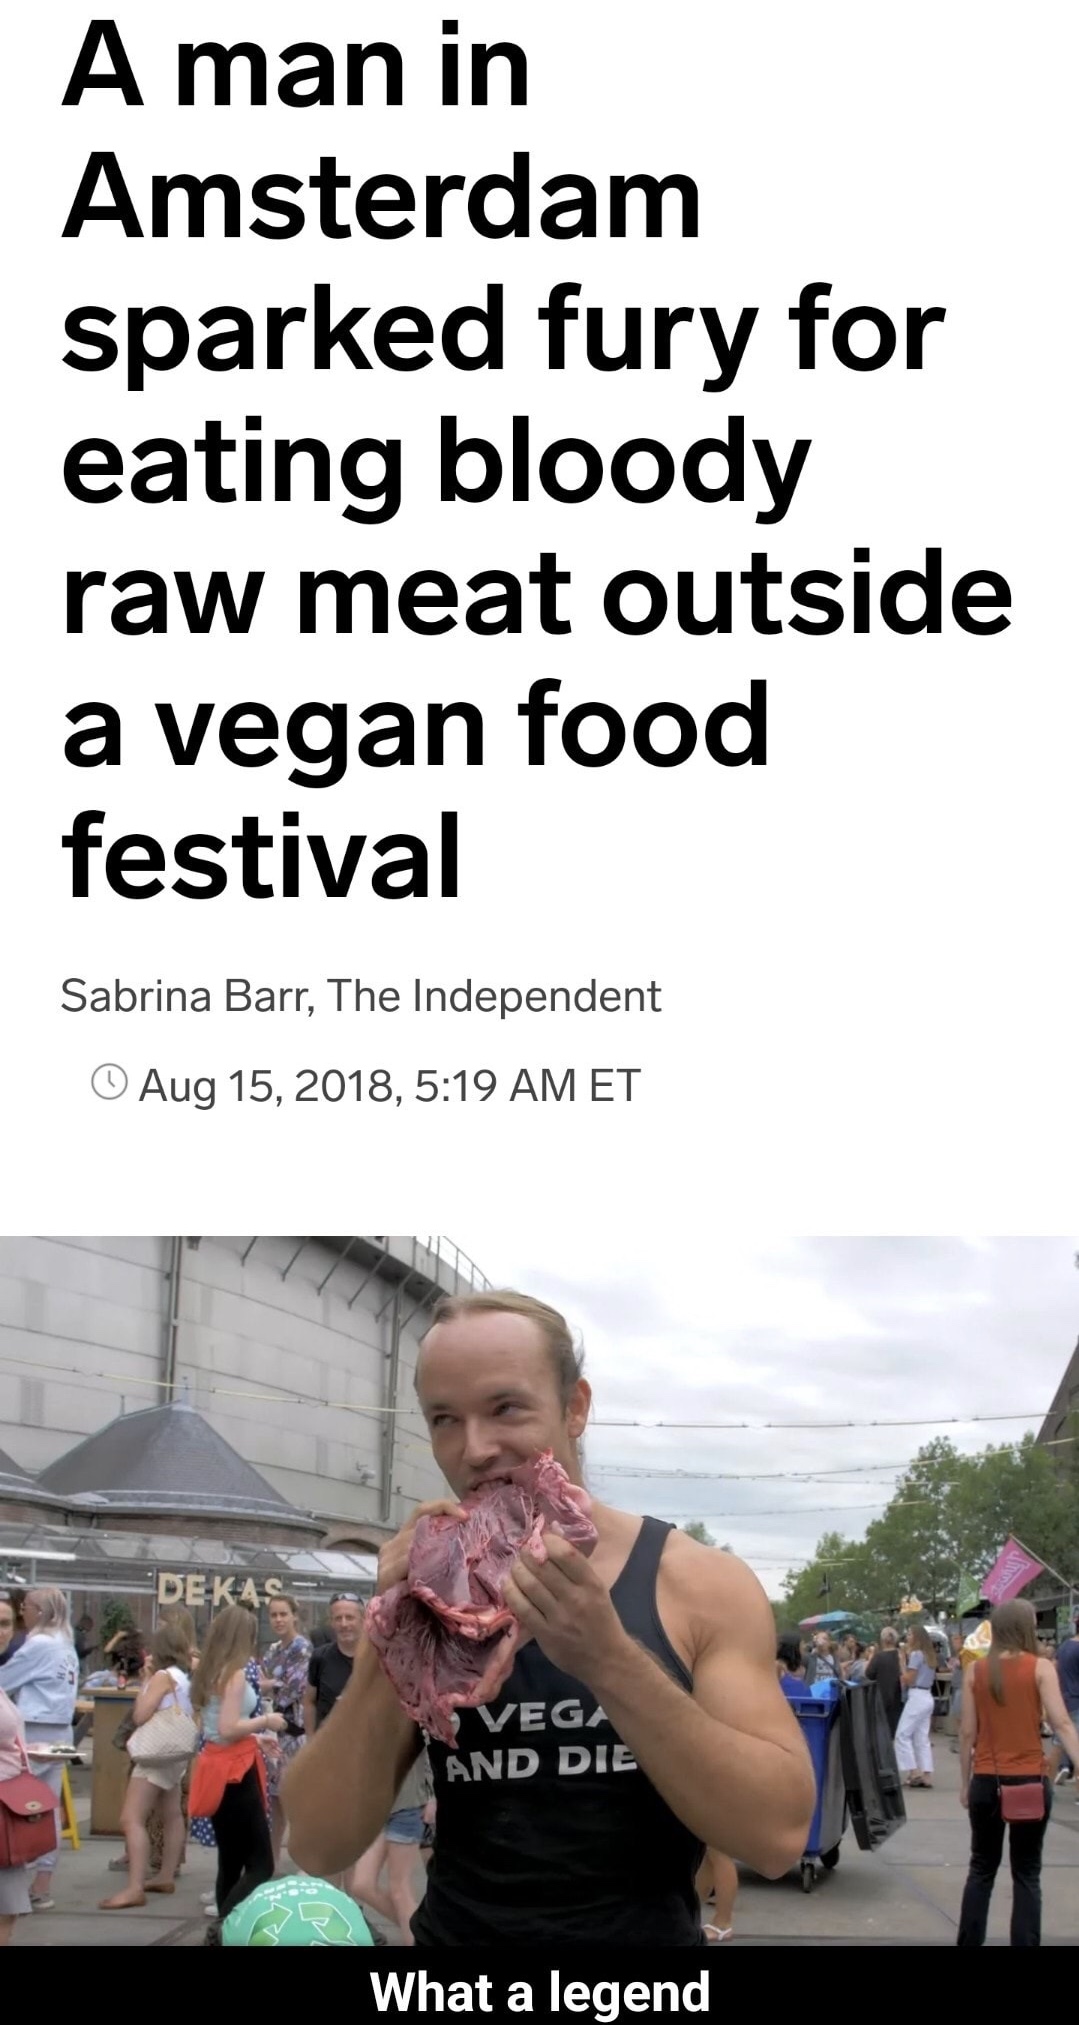 Man in amsterdam sparked fury for eating bloody raw meat outside Vegan festival